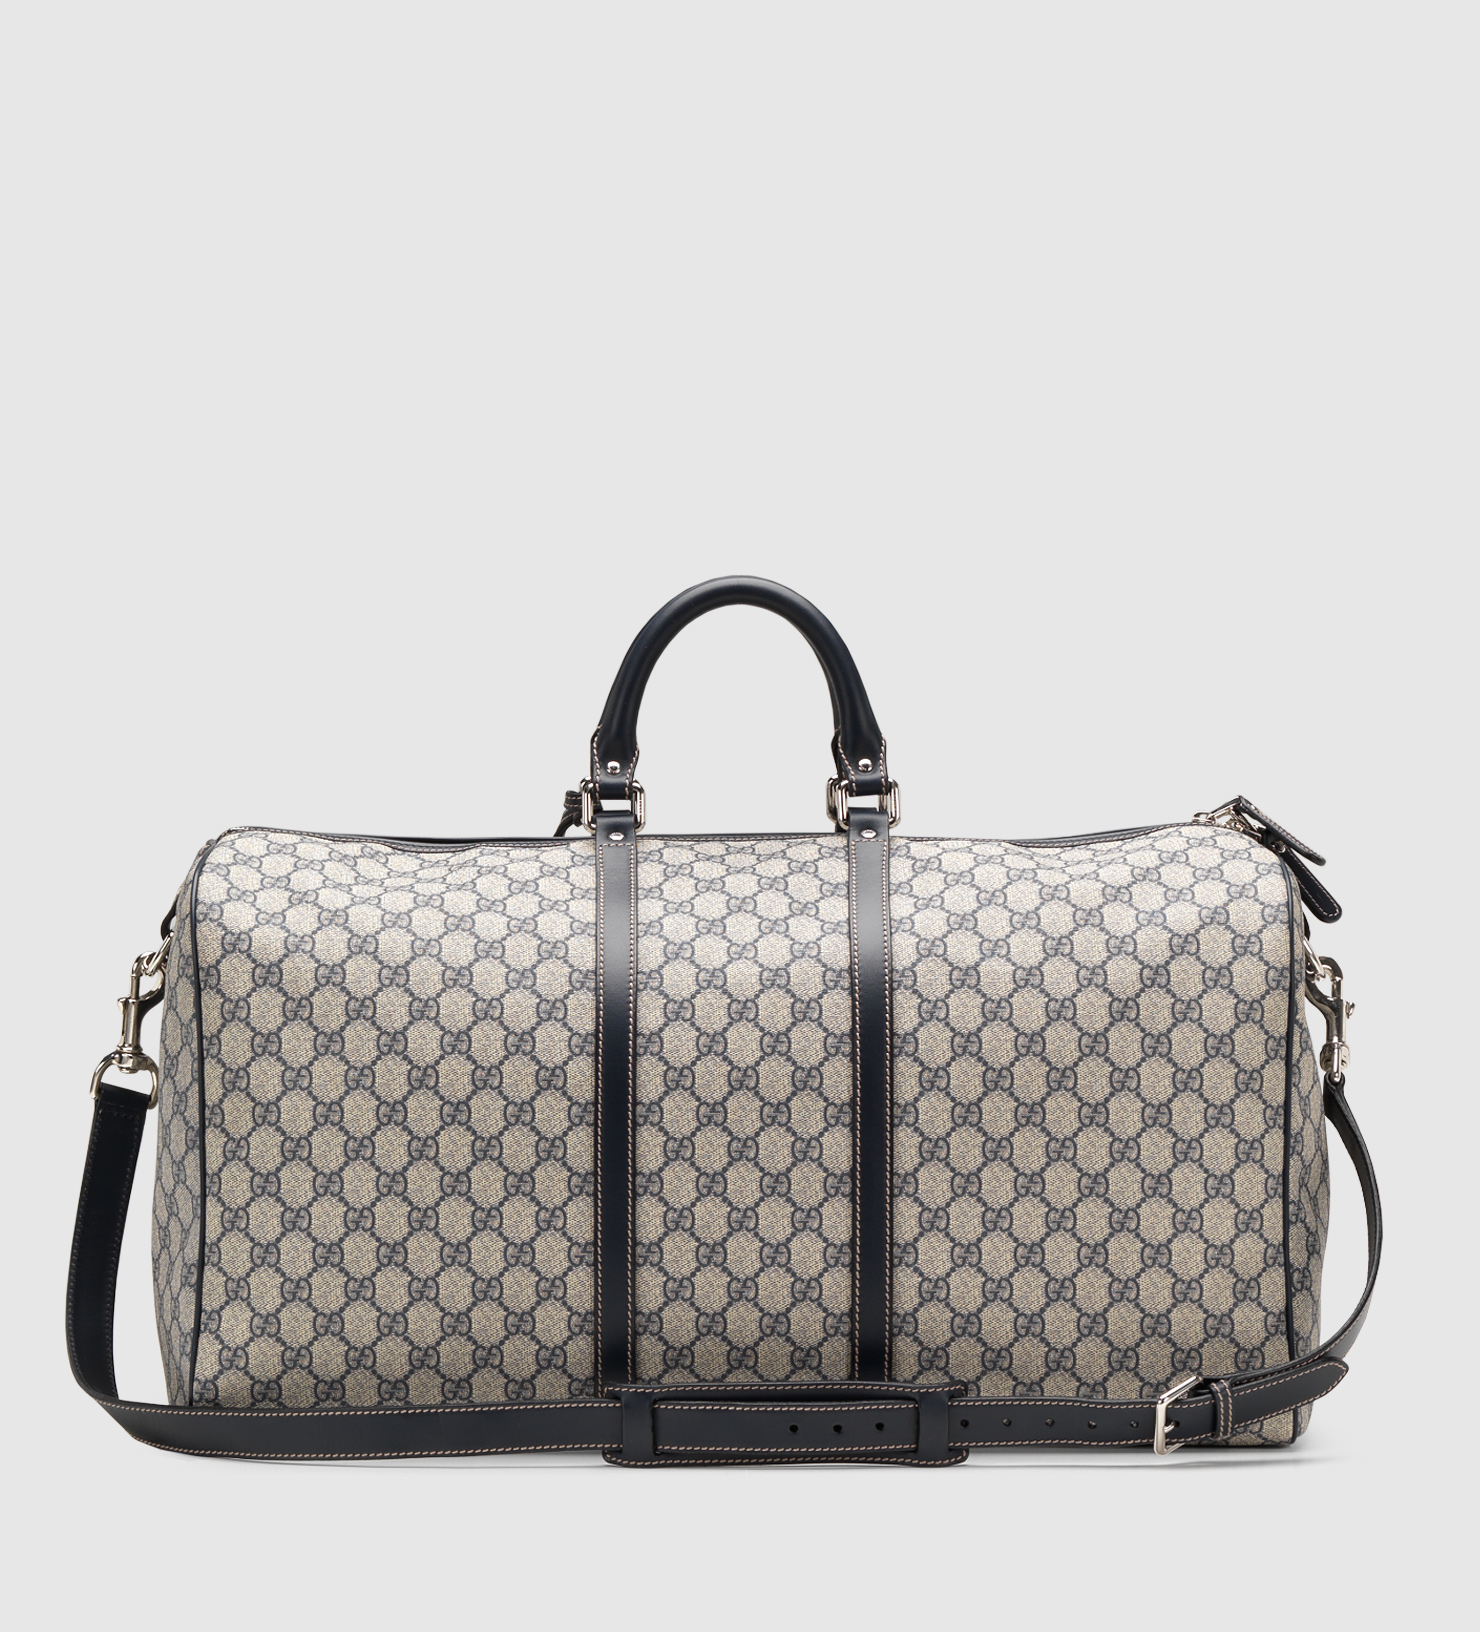 Lyst - Gucci Large Carry-on Duffle Bag in Gray for Men